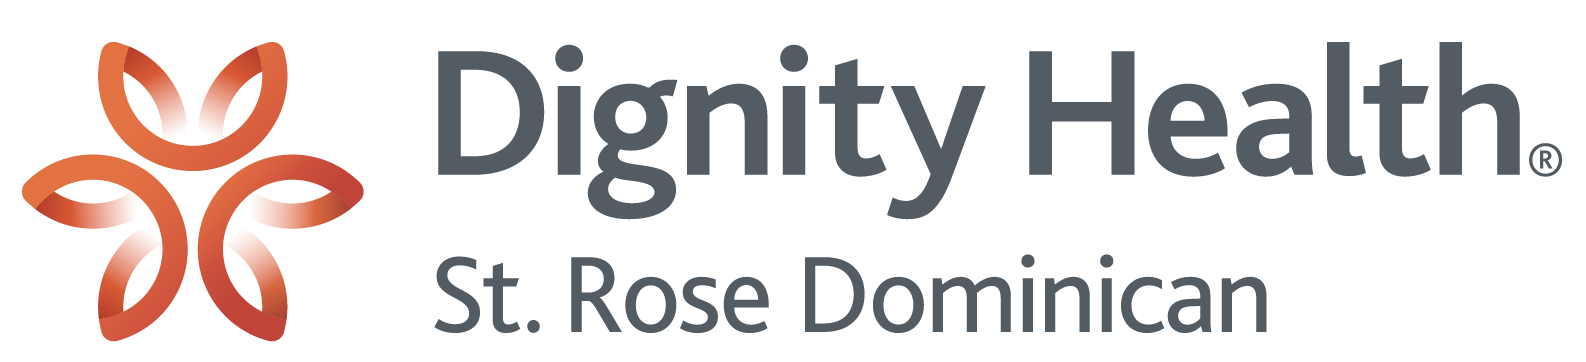 Dignity Health St Rose Dominican Logo